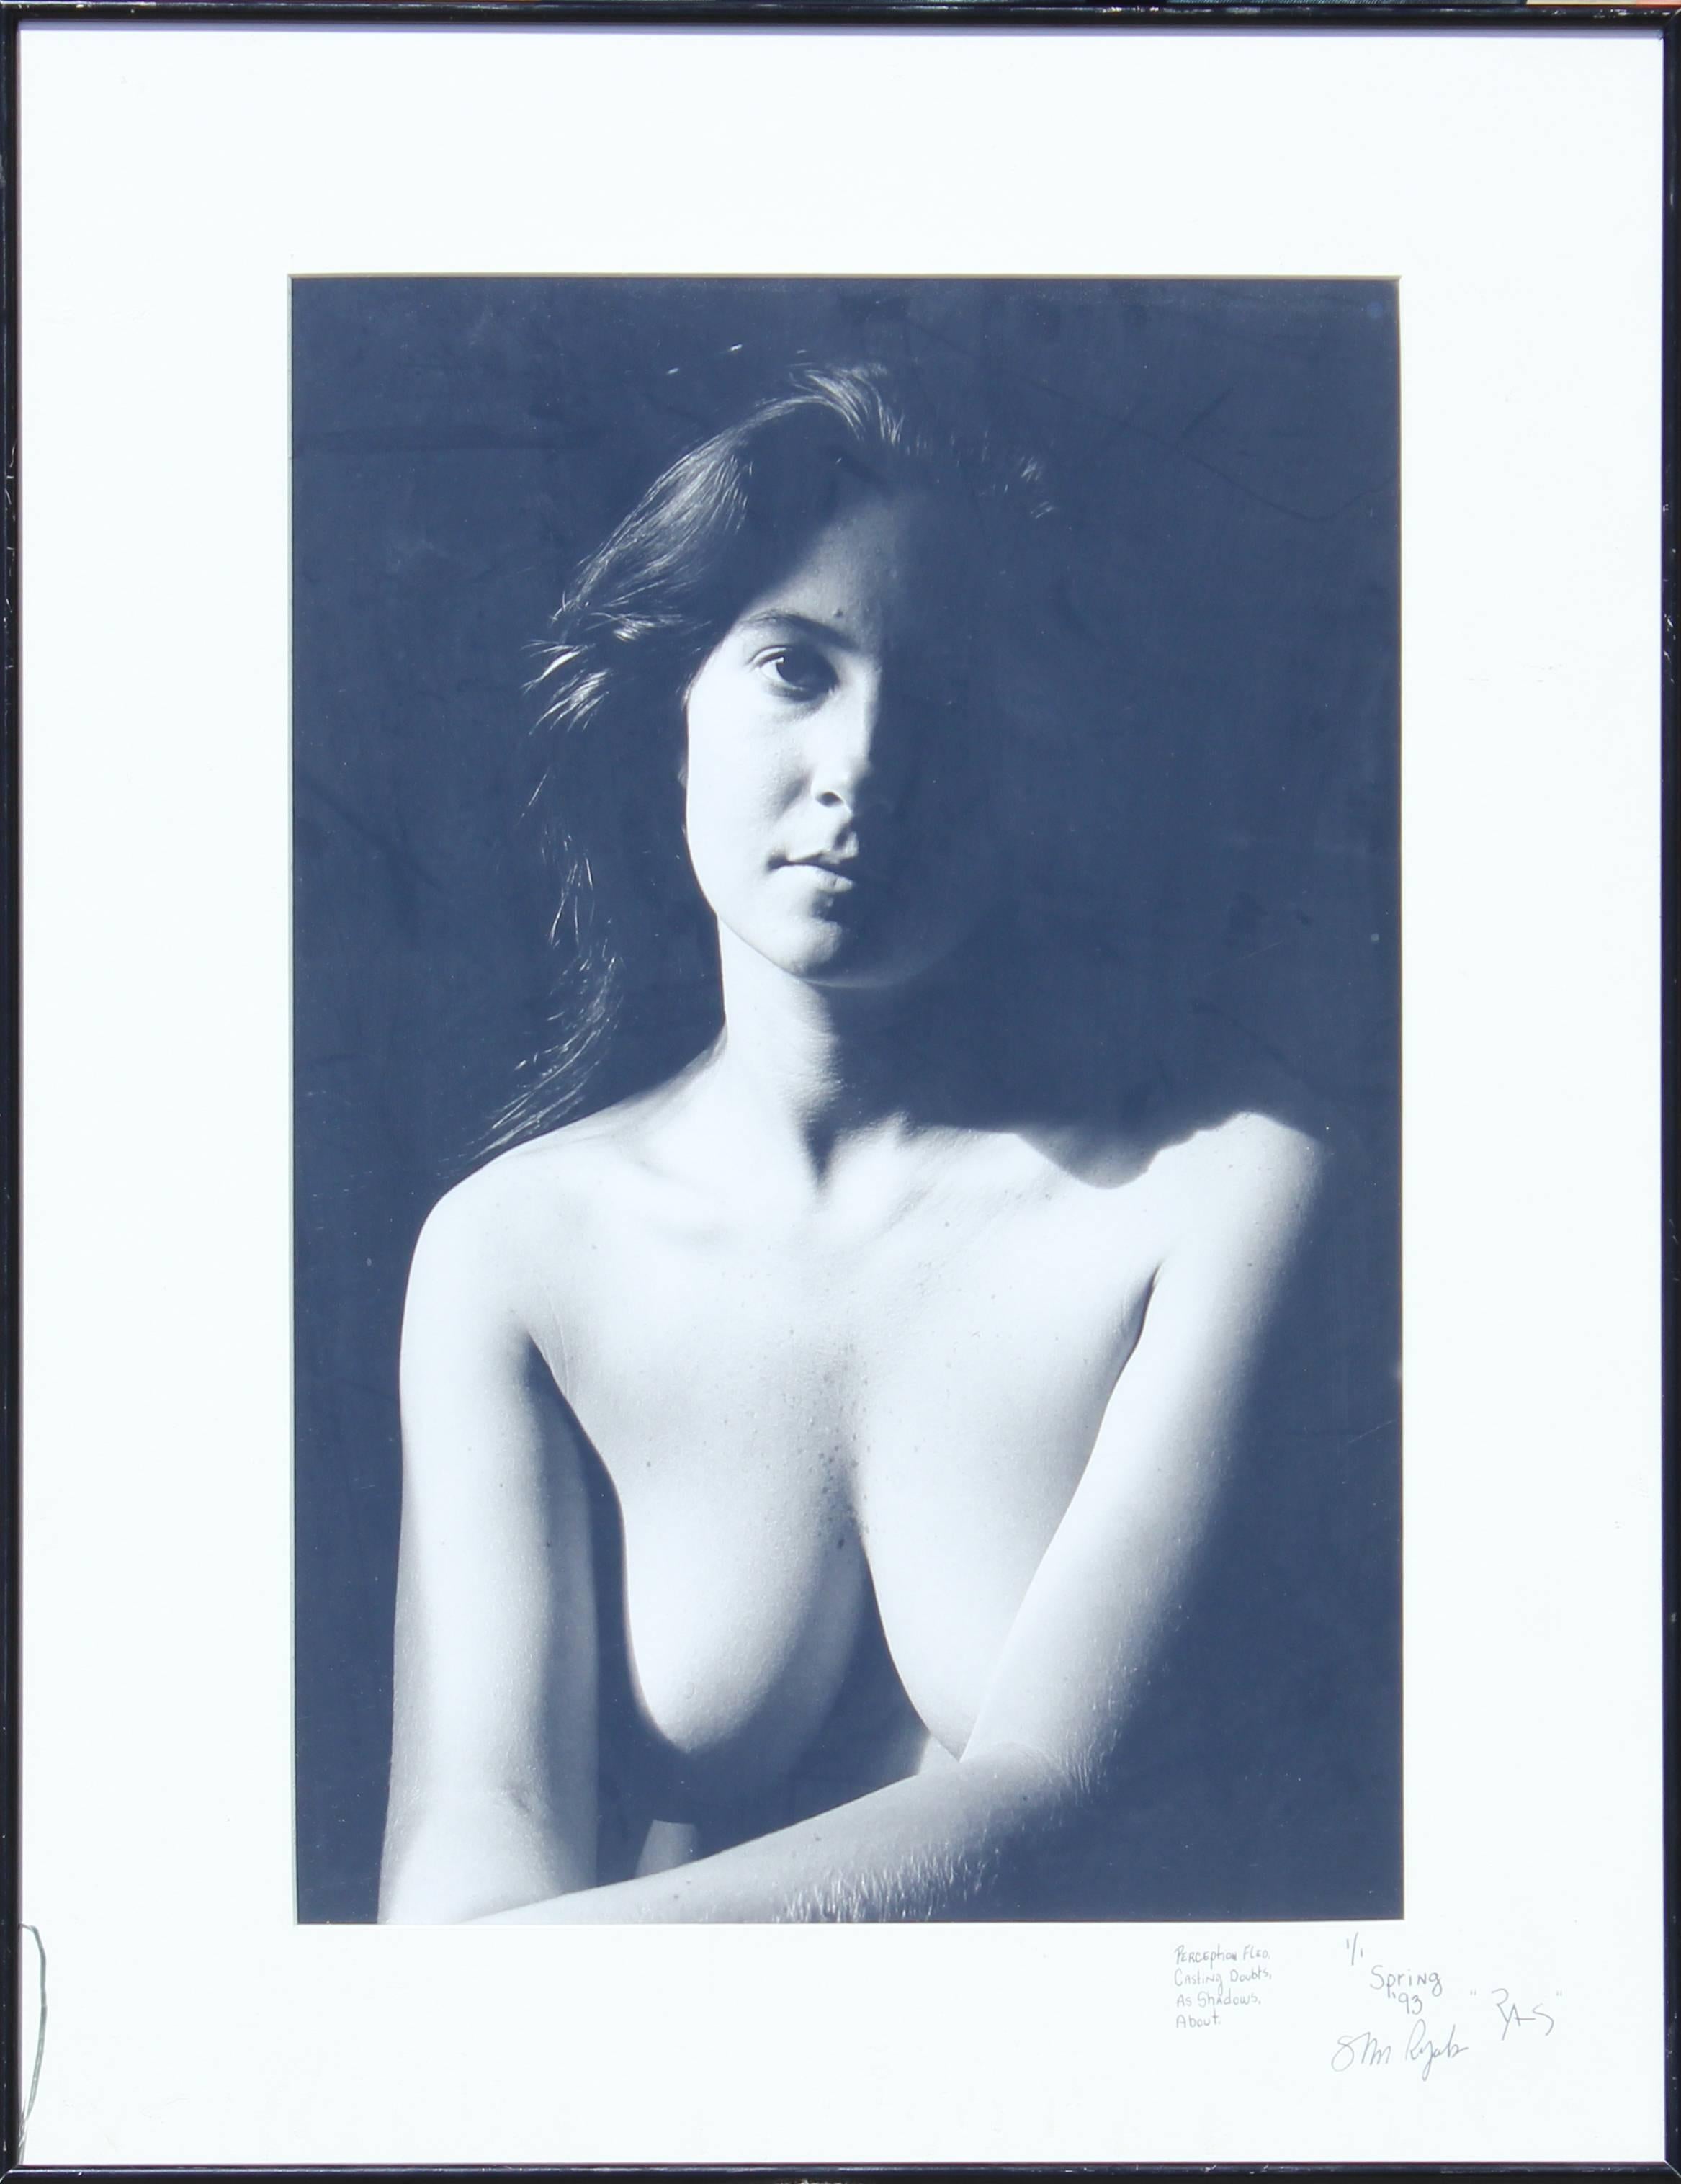 Unknown Nude Photograph - "Perception Fled, Casting Doubts, As Shadows, About" Nude Female Portrait